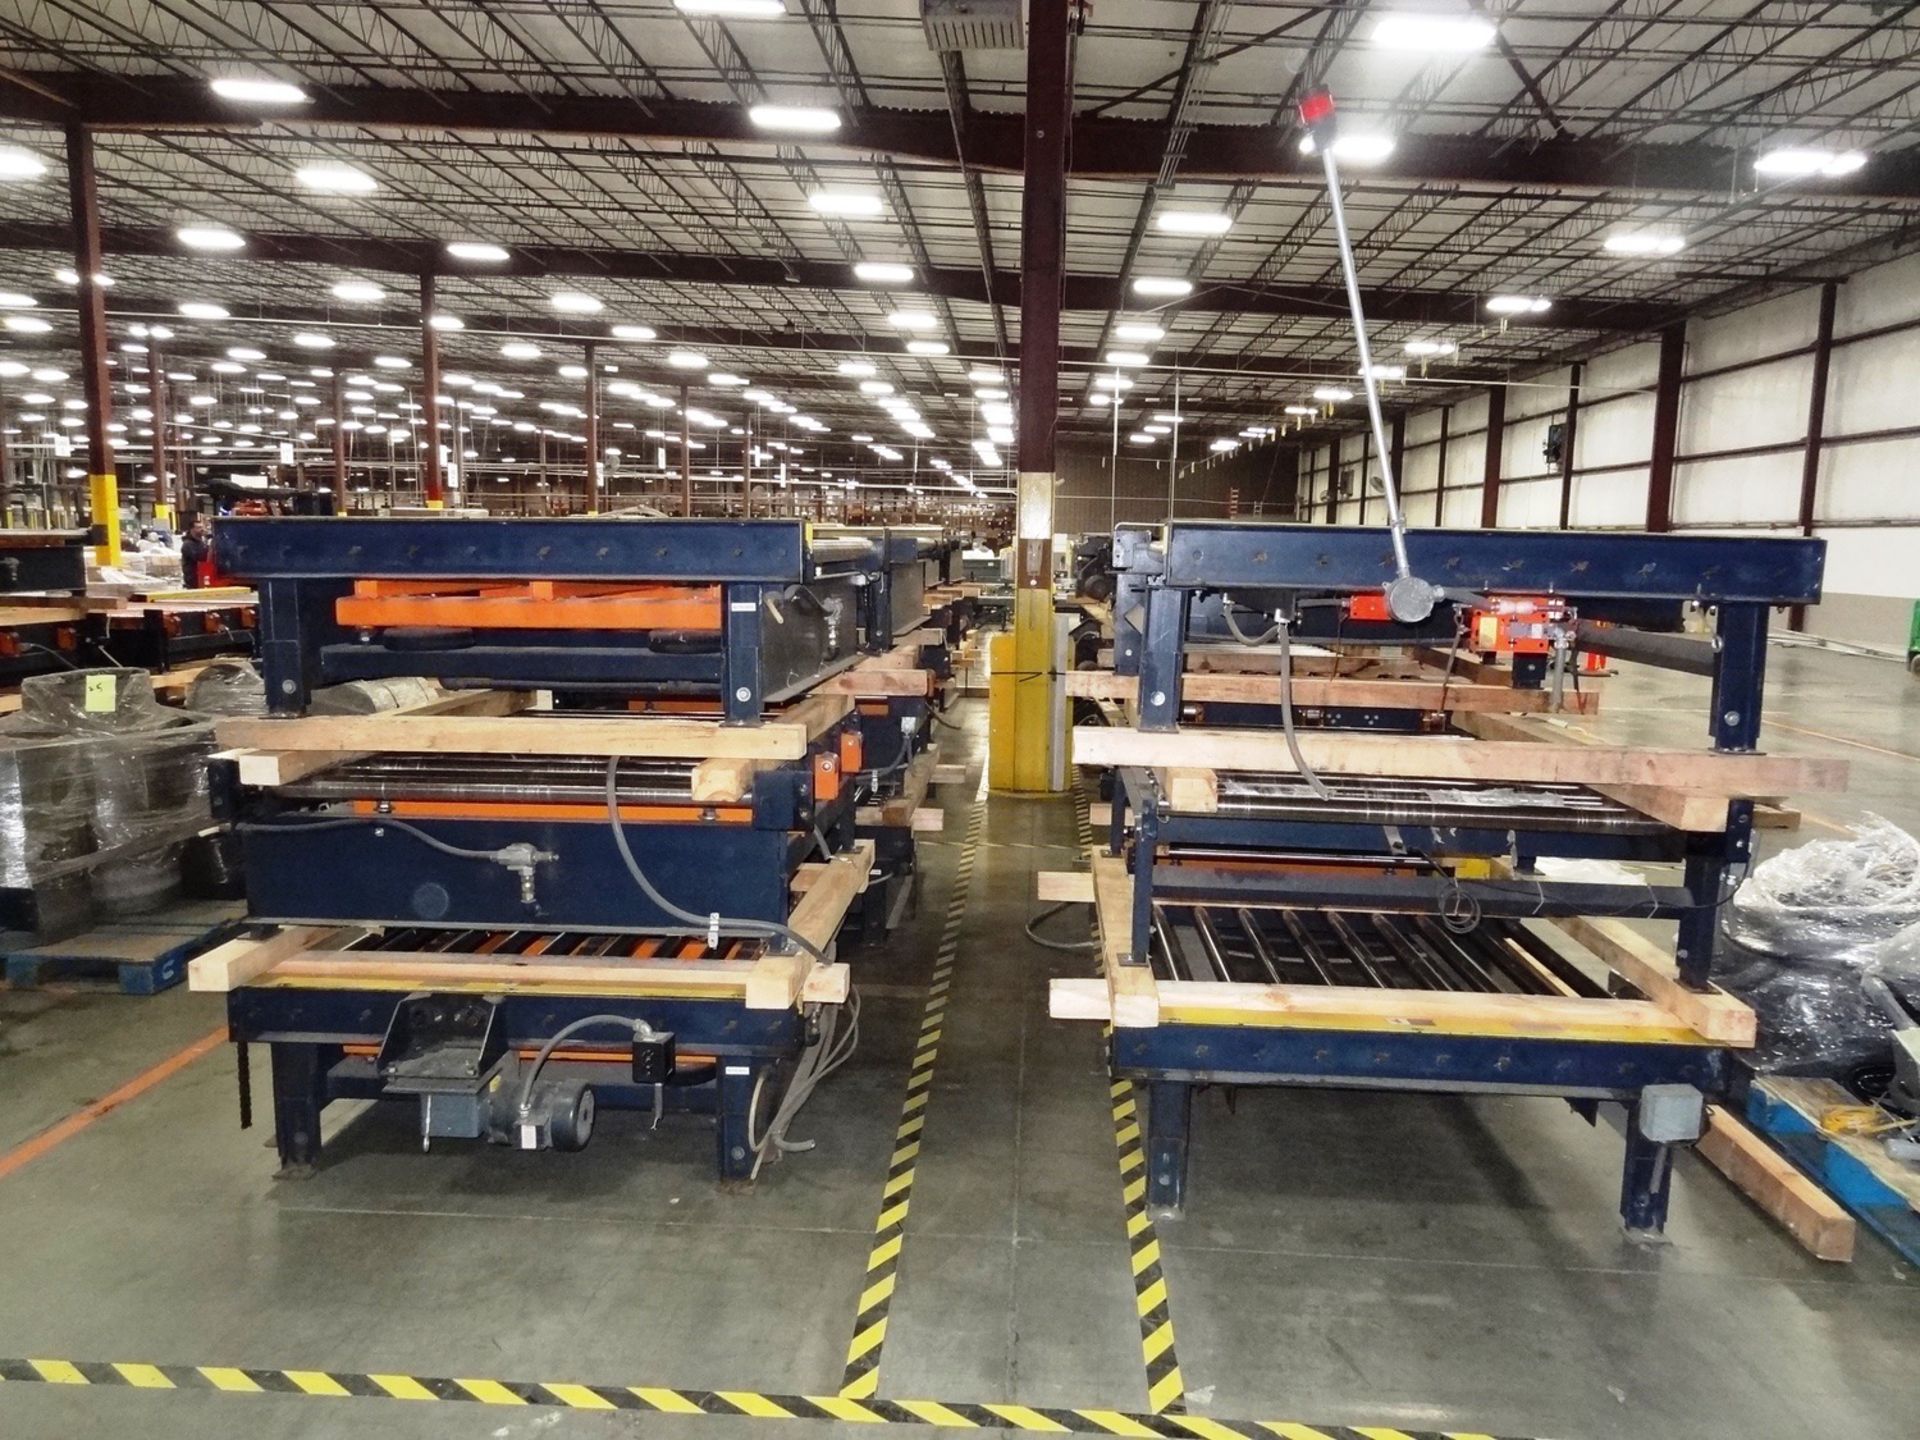 Pallet Conveyor System - 250' Total - Image 2 of 4